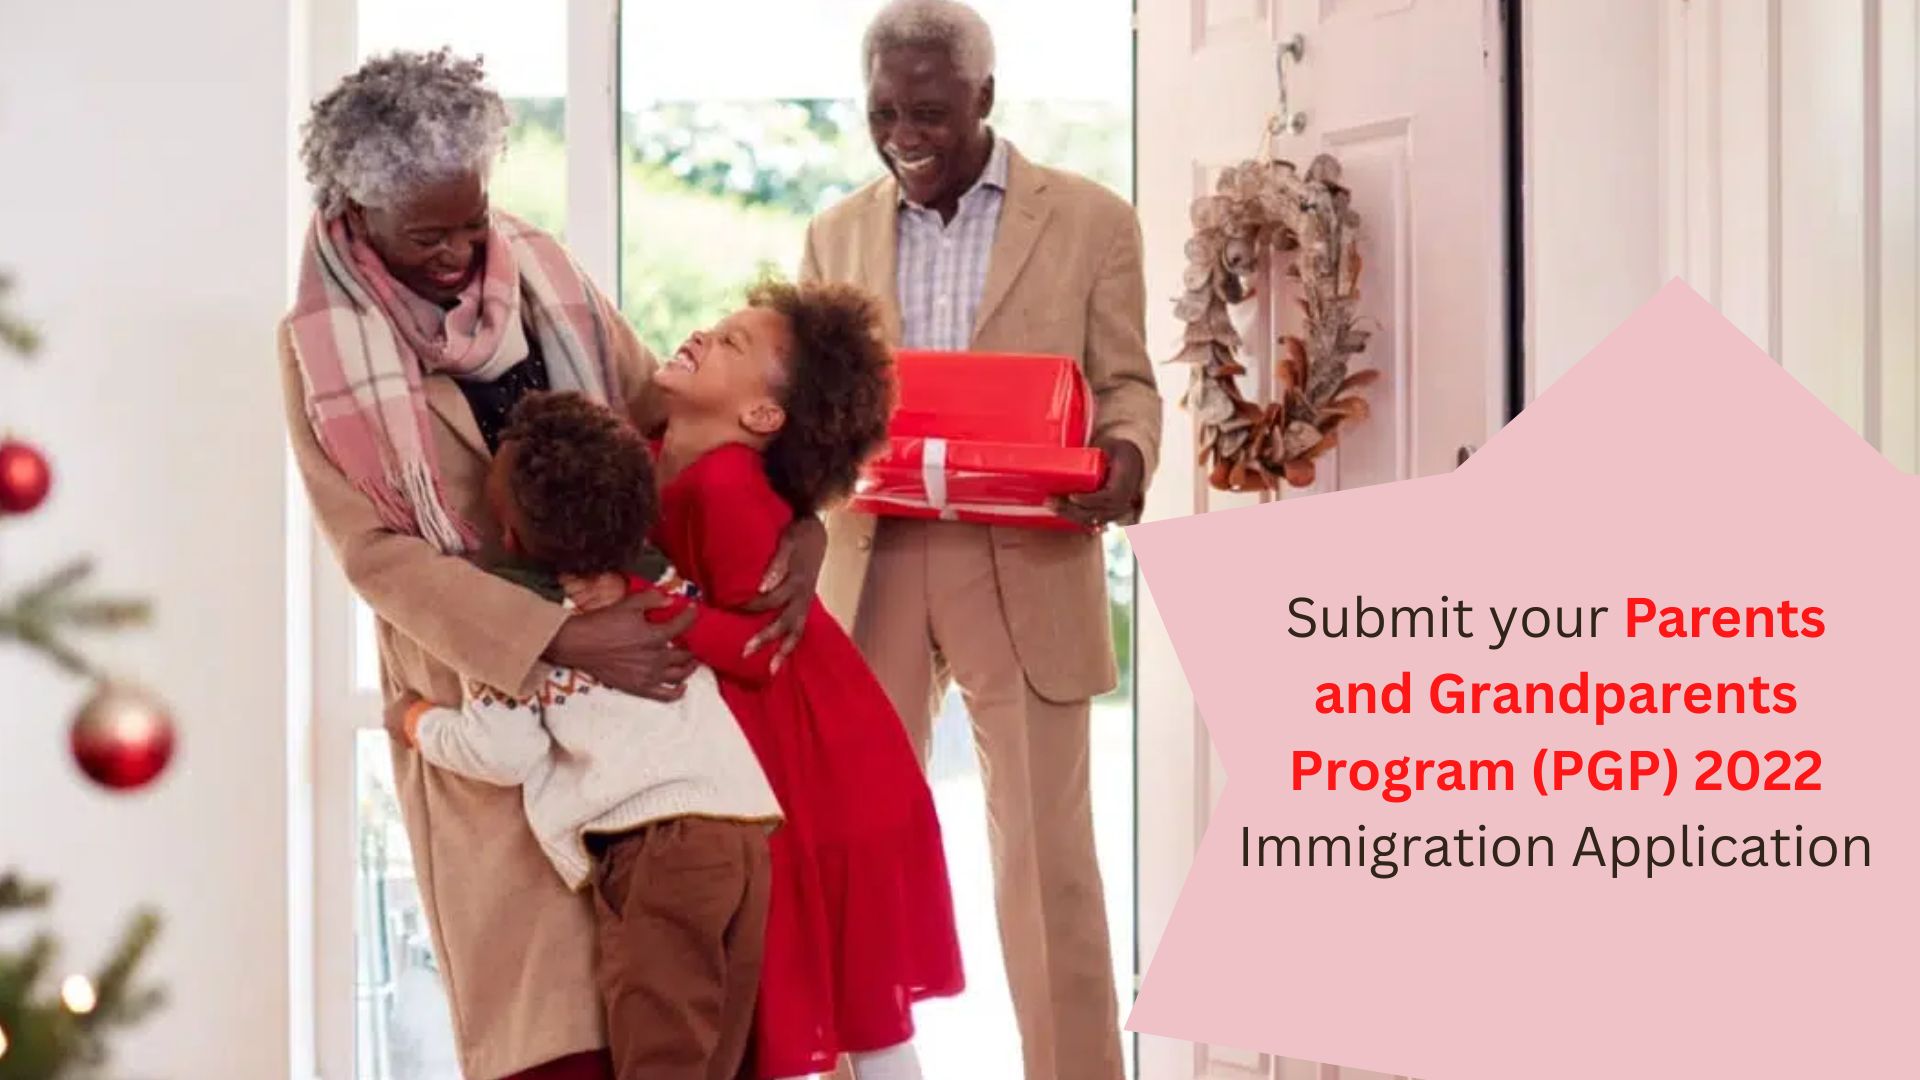 Submit your Parents and Grandparents Program (PGP) 2022 Immigration Application